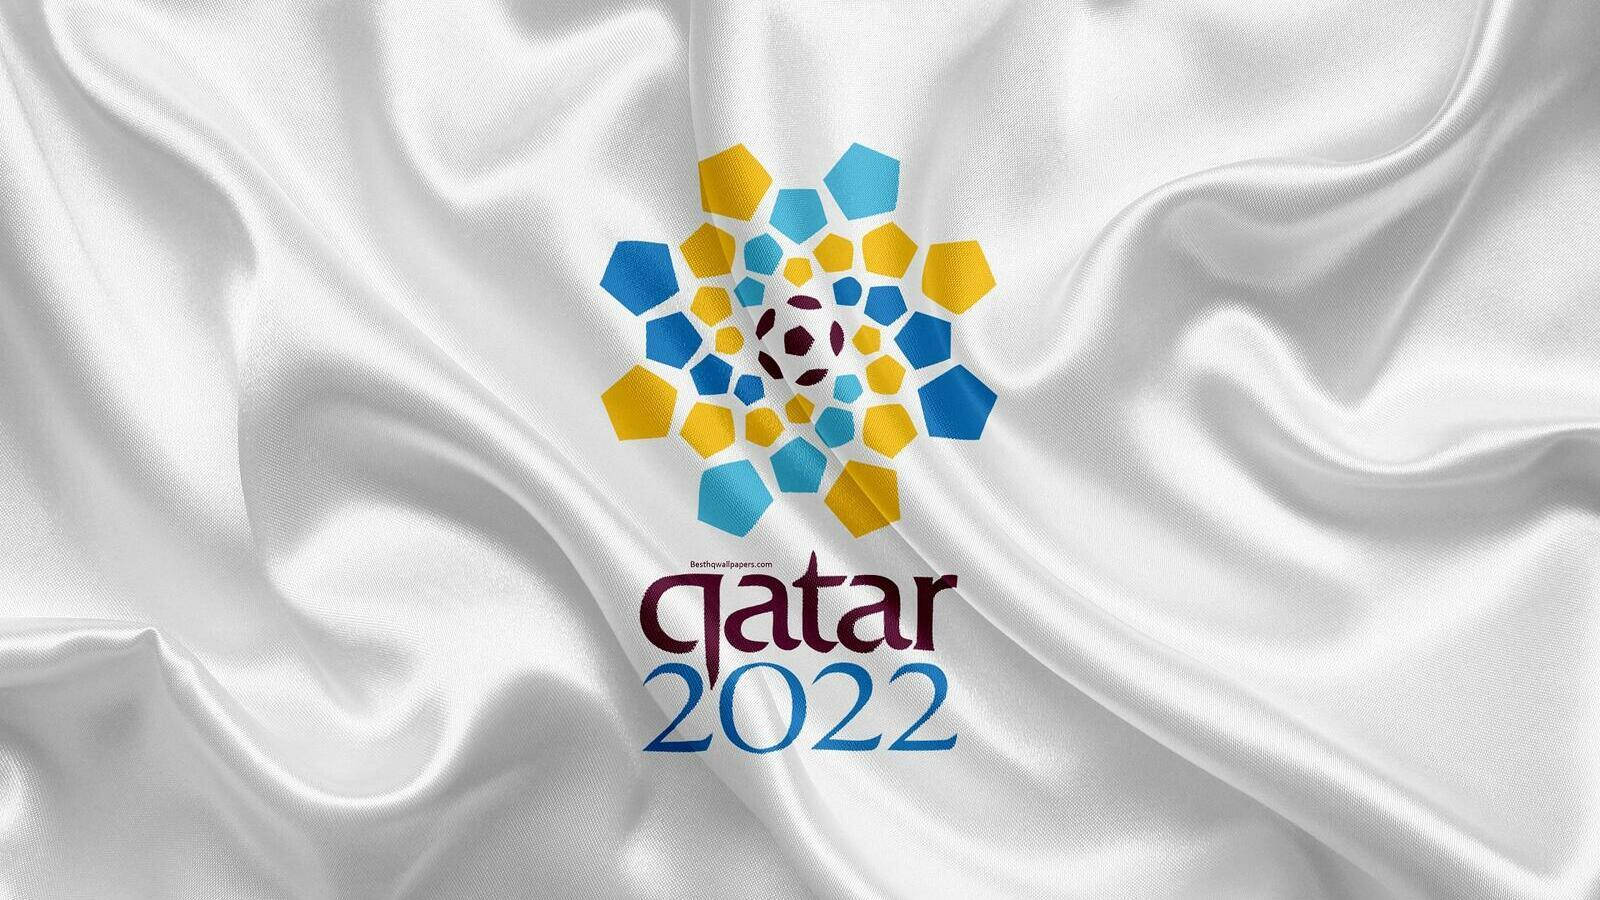 Feel the excitement with the upcoming FIFA World Cup 2022! Wallpaper